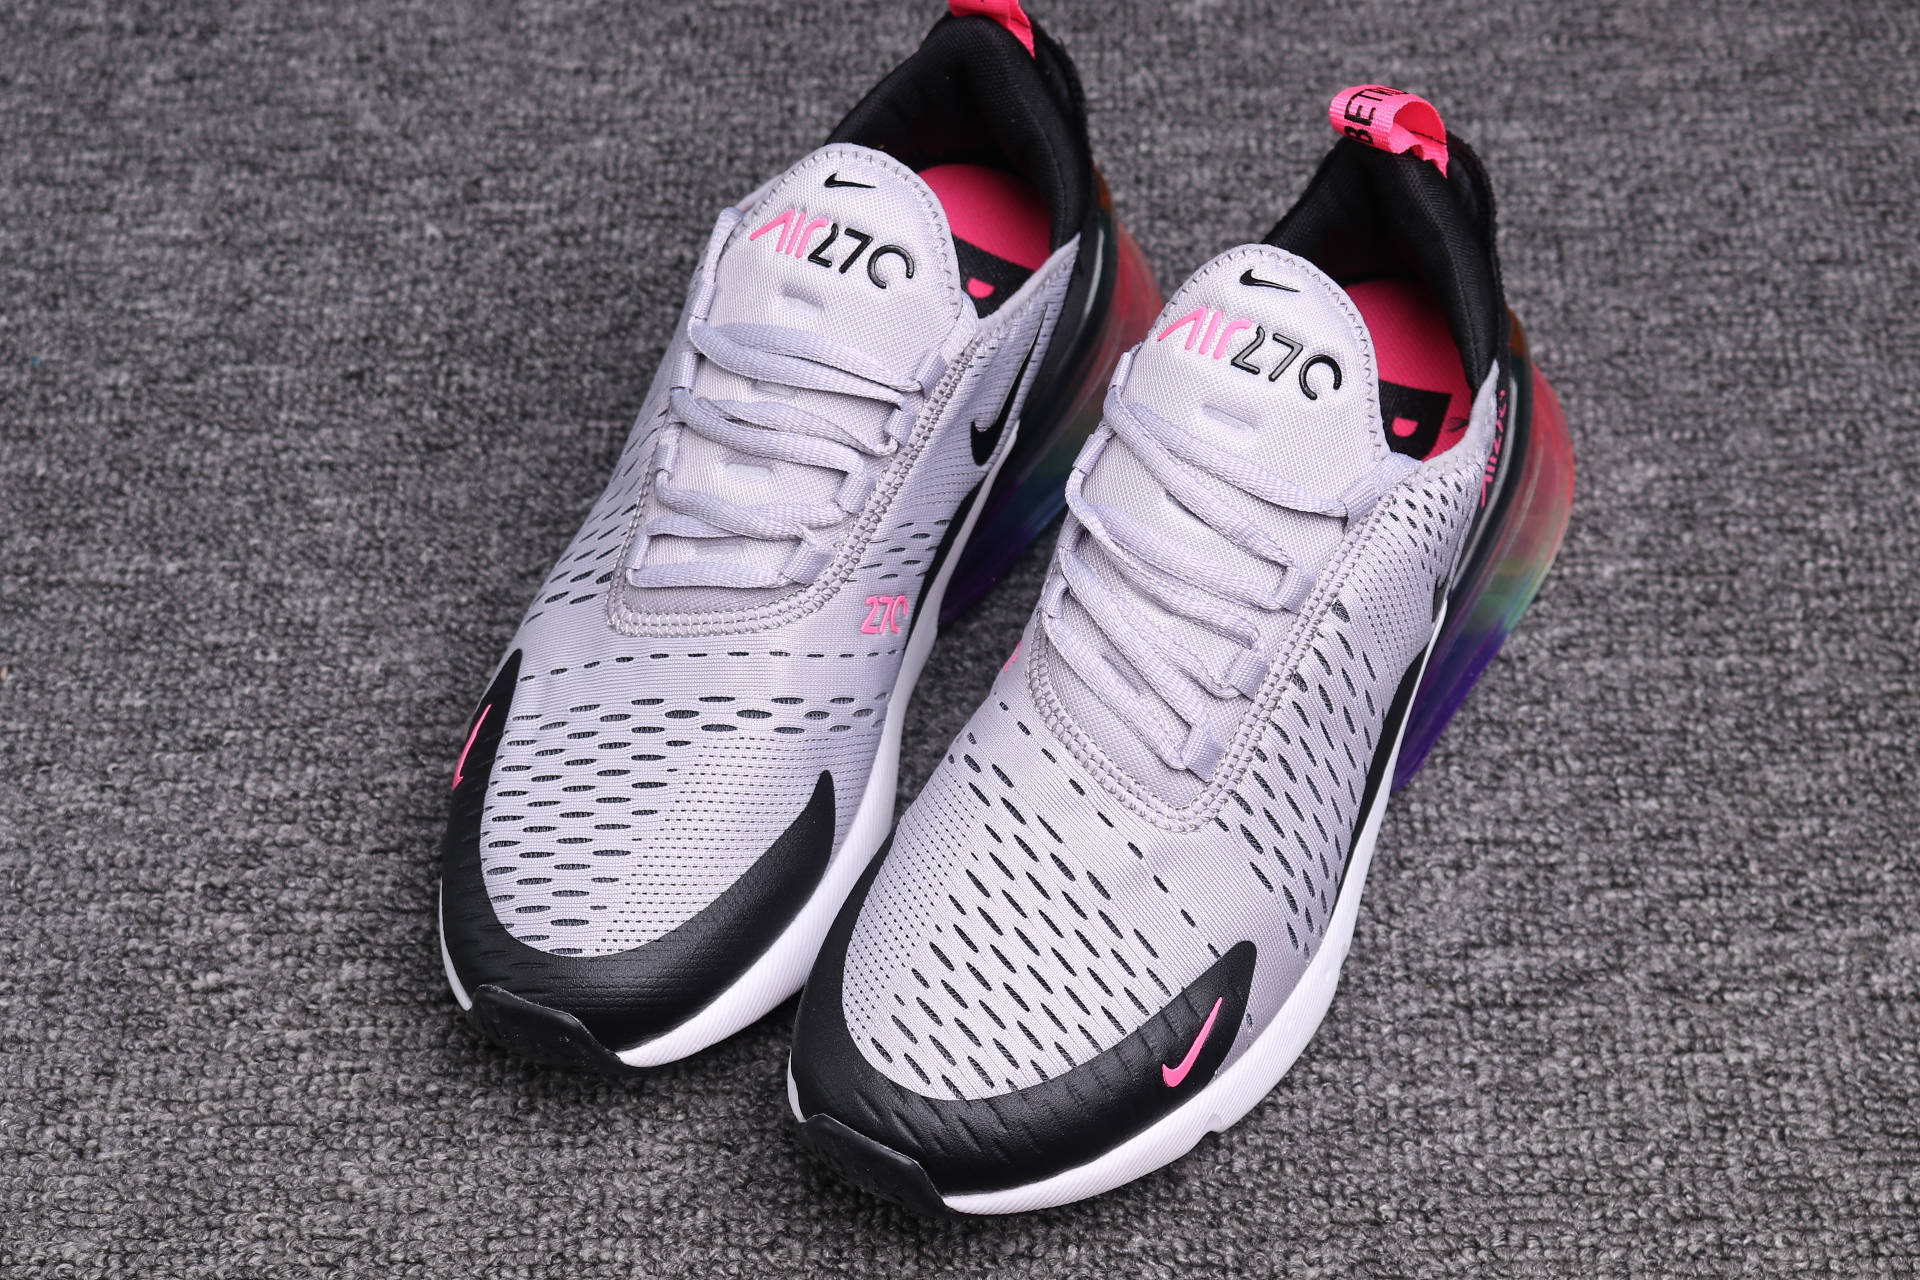 Women Supreme x Nike Air Max 270 Grey Black Red Shoes - Click Image to Close